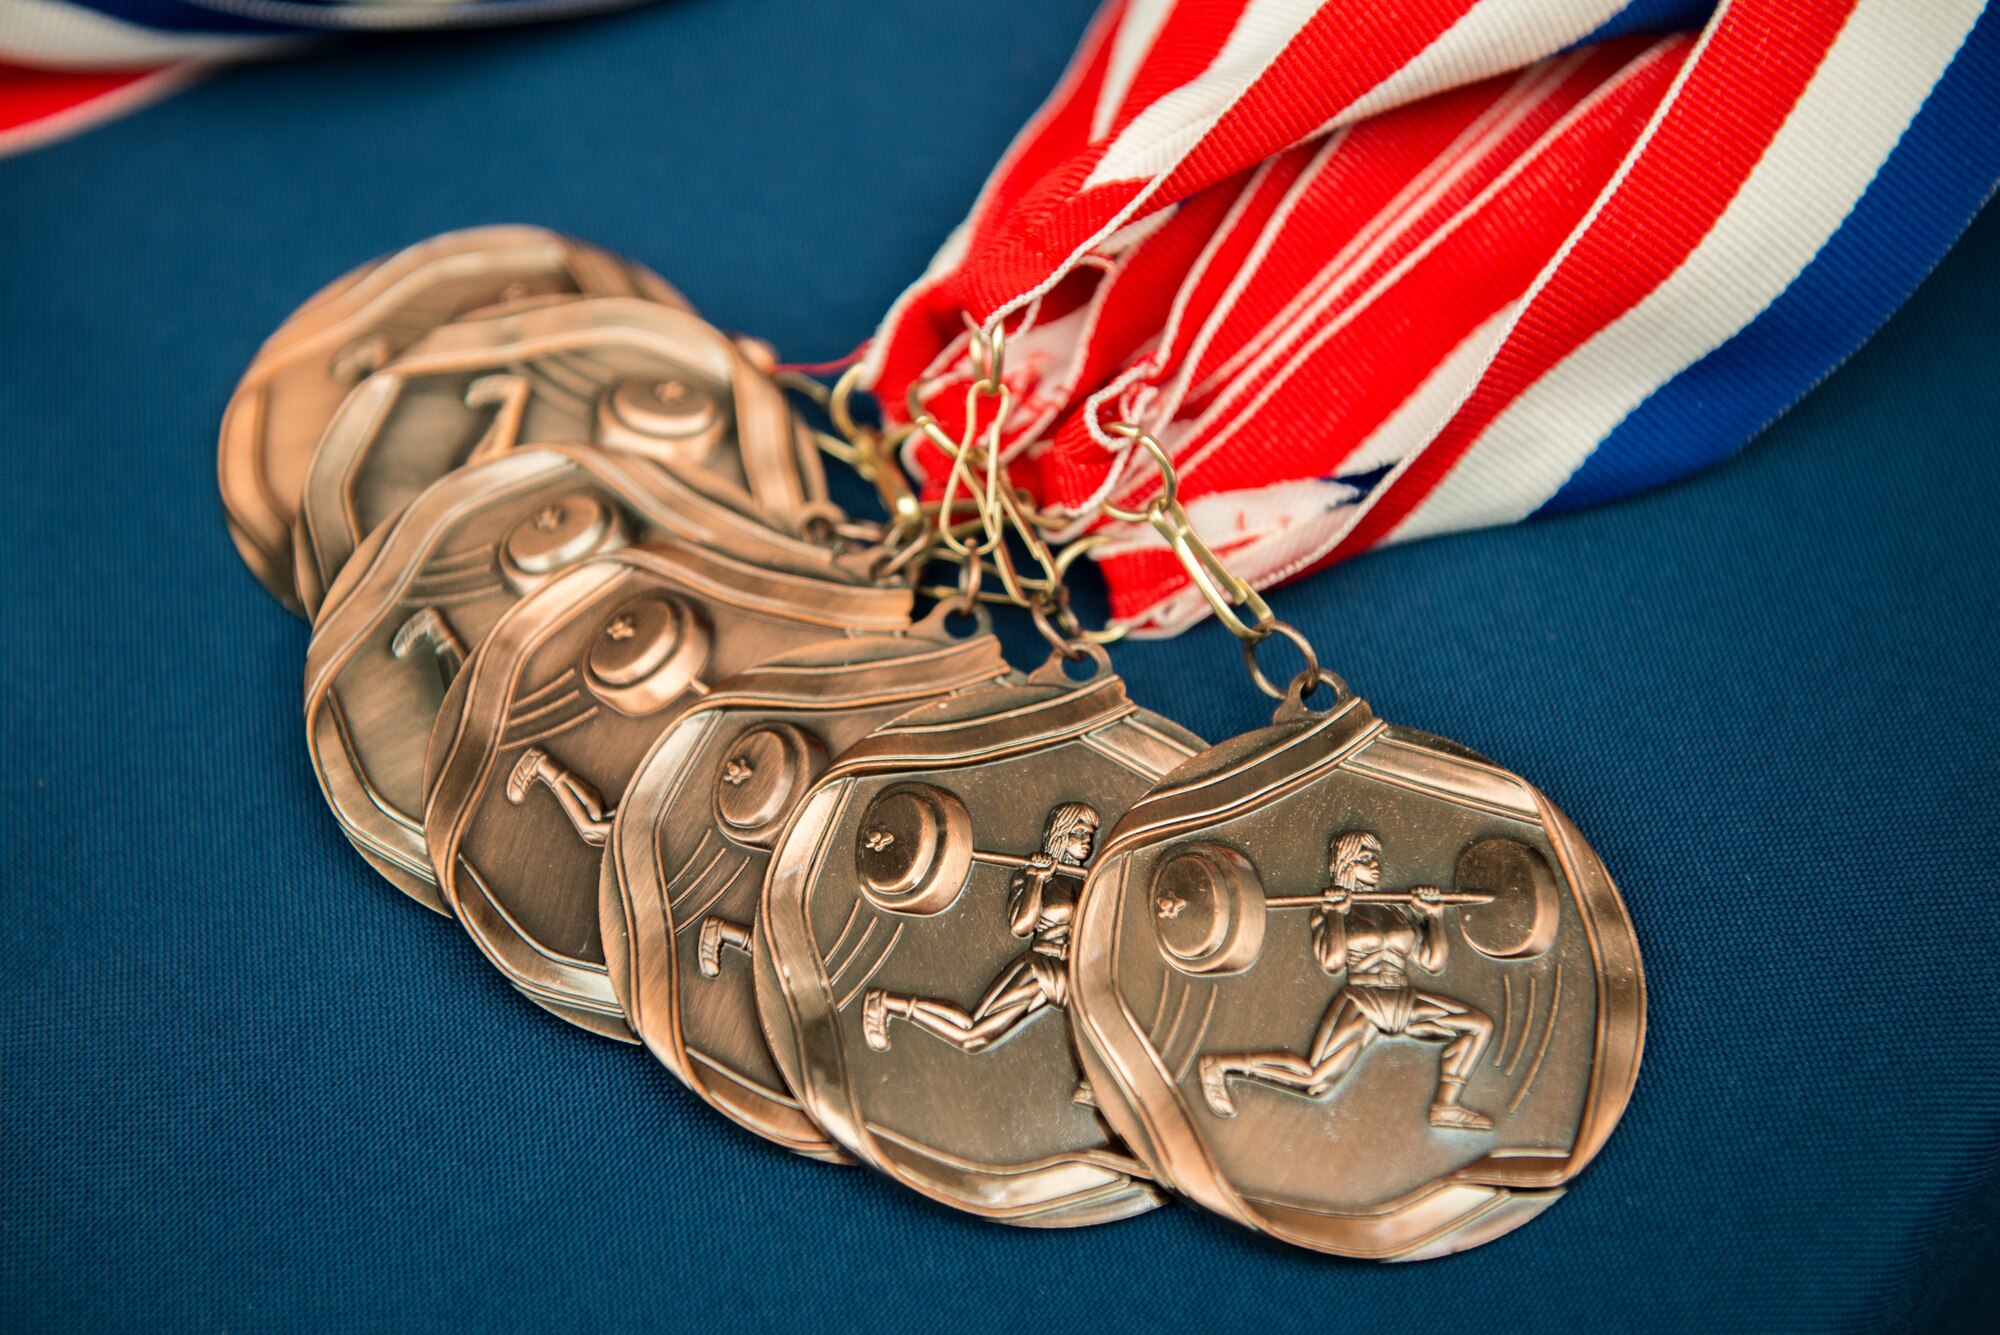 Third place, bronze medals rest on a table during the Luke Air Force Base Powerlifting Competition at Luke AFB, Ariz., May 18, 2018. First through third place medals were awarded to competitors who lifted the most weight and completed the most repetitions for each workout. Powerlift competitor, John Canterberry won the overall competition lifting a total combined weight of 1,500 lbs. (U.S. Air Force photo by Airman 1st Class Alexander Cook)